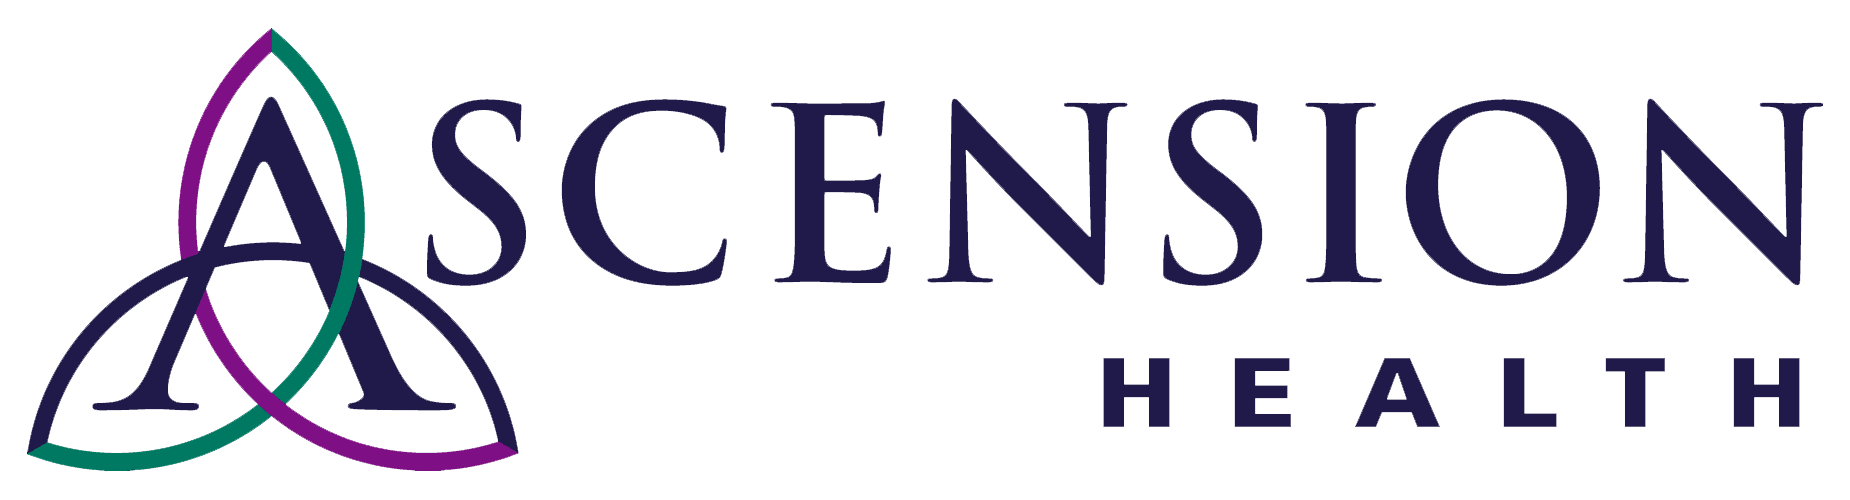 "Ascension Health logo with interlinked triangle design in purple and green."